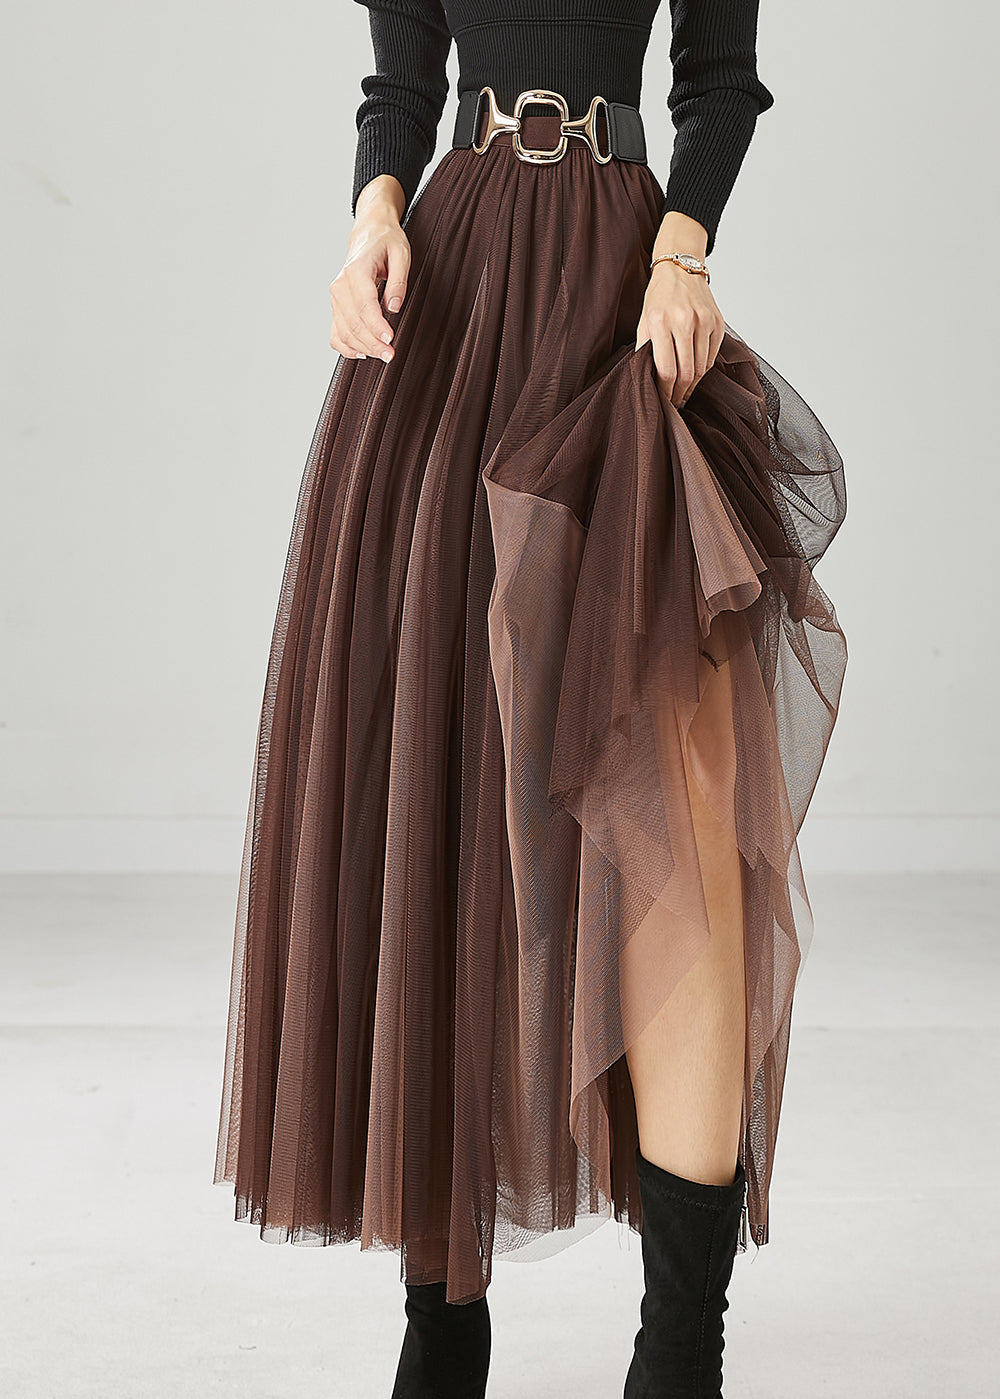 Chocolate Patchwork Tulle Skirts Wrinkled Spring